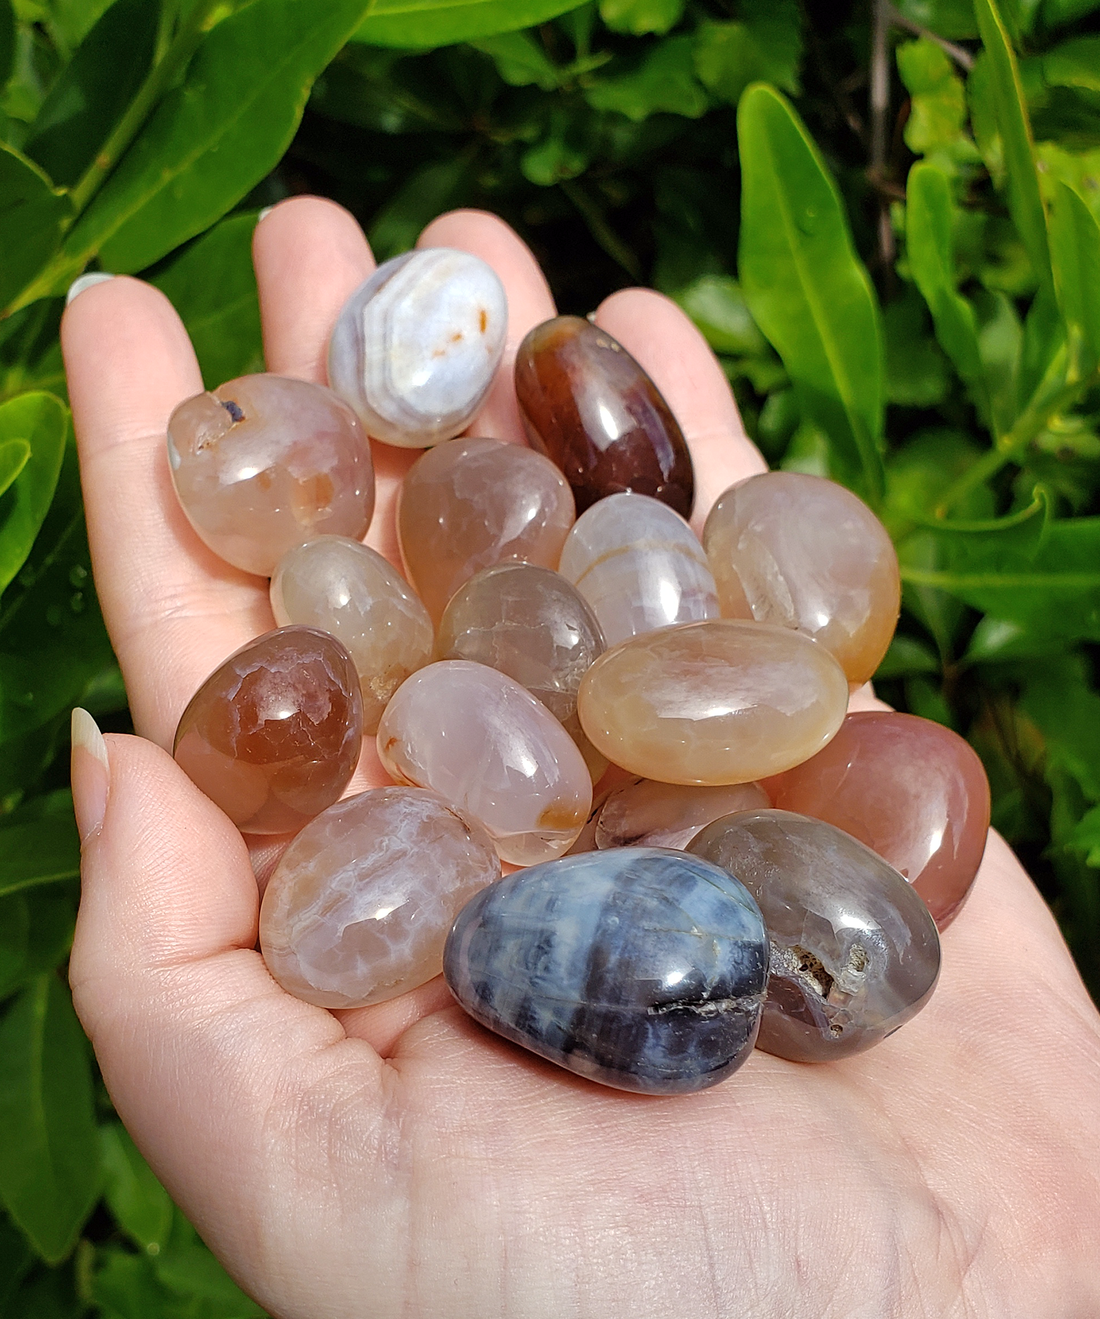 snakeskin agate crystals in hand